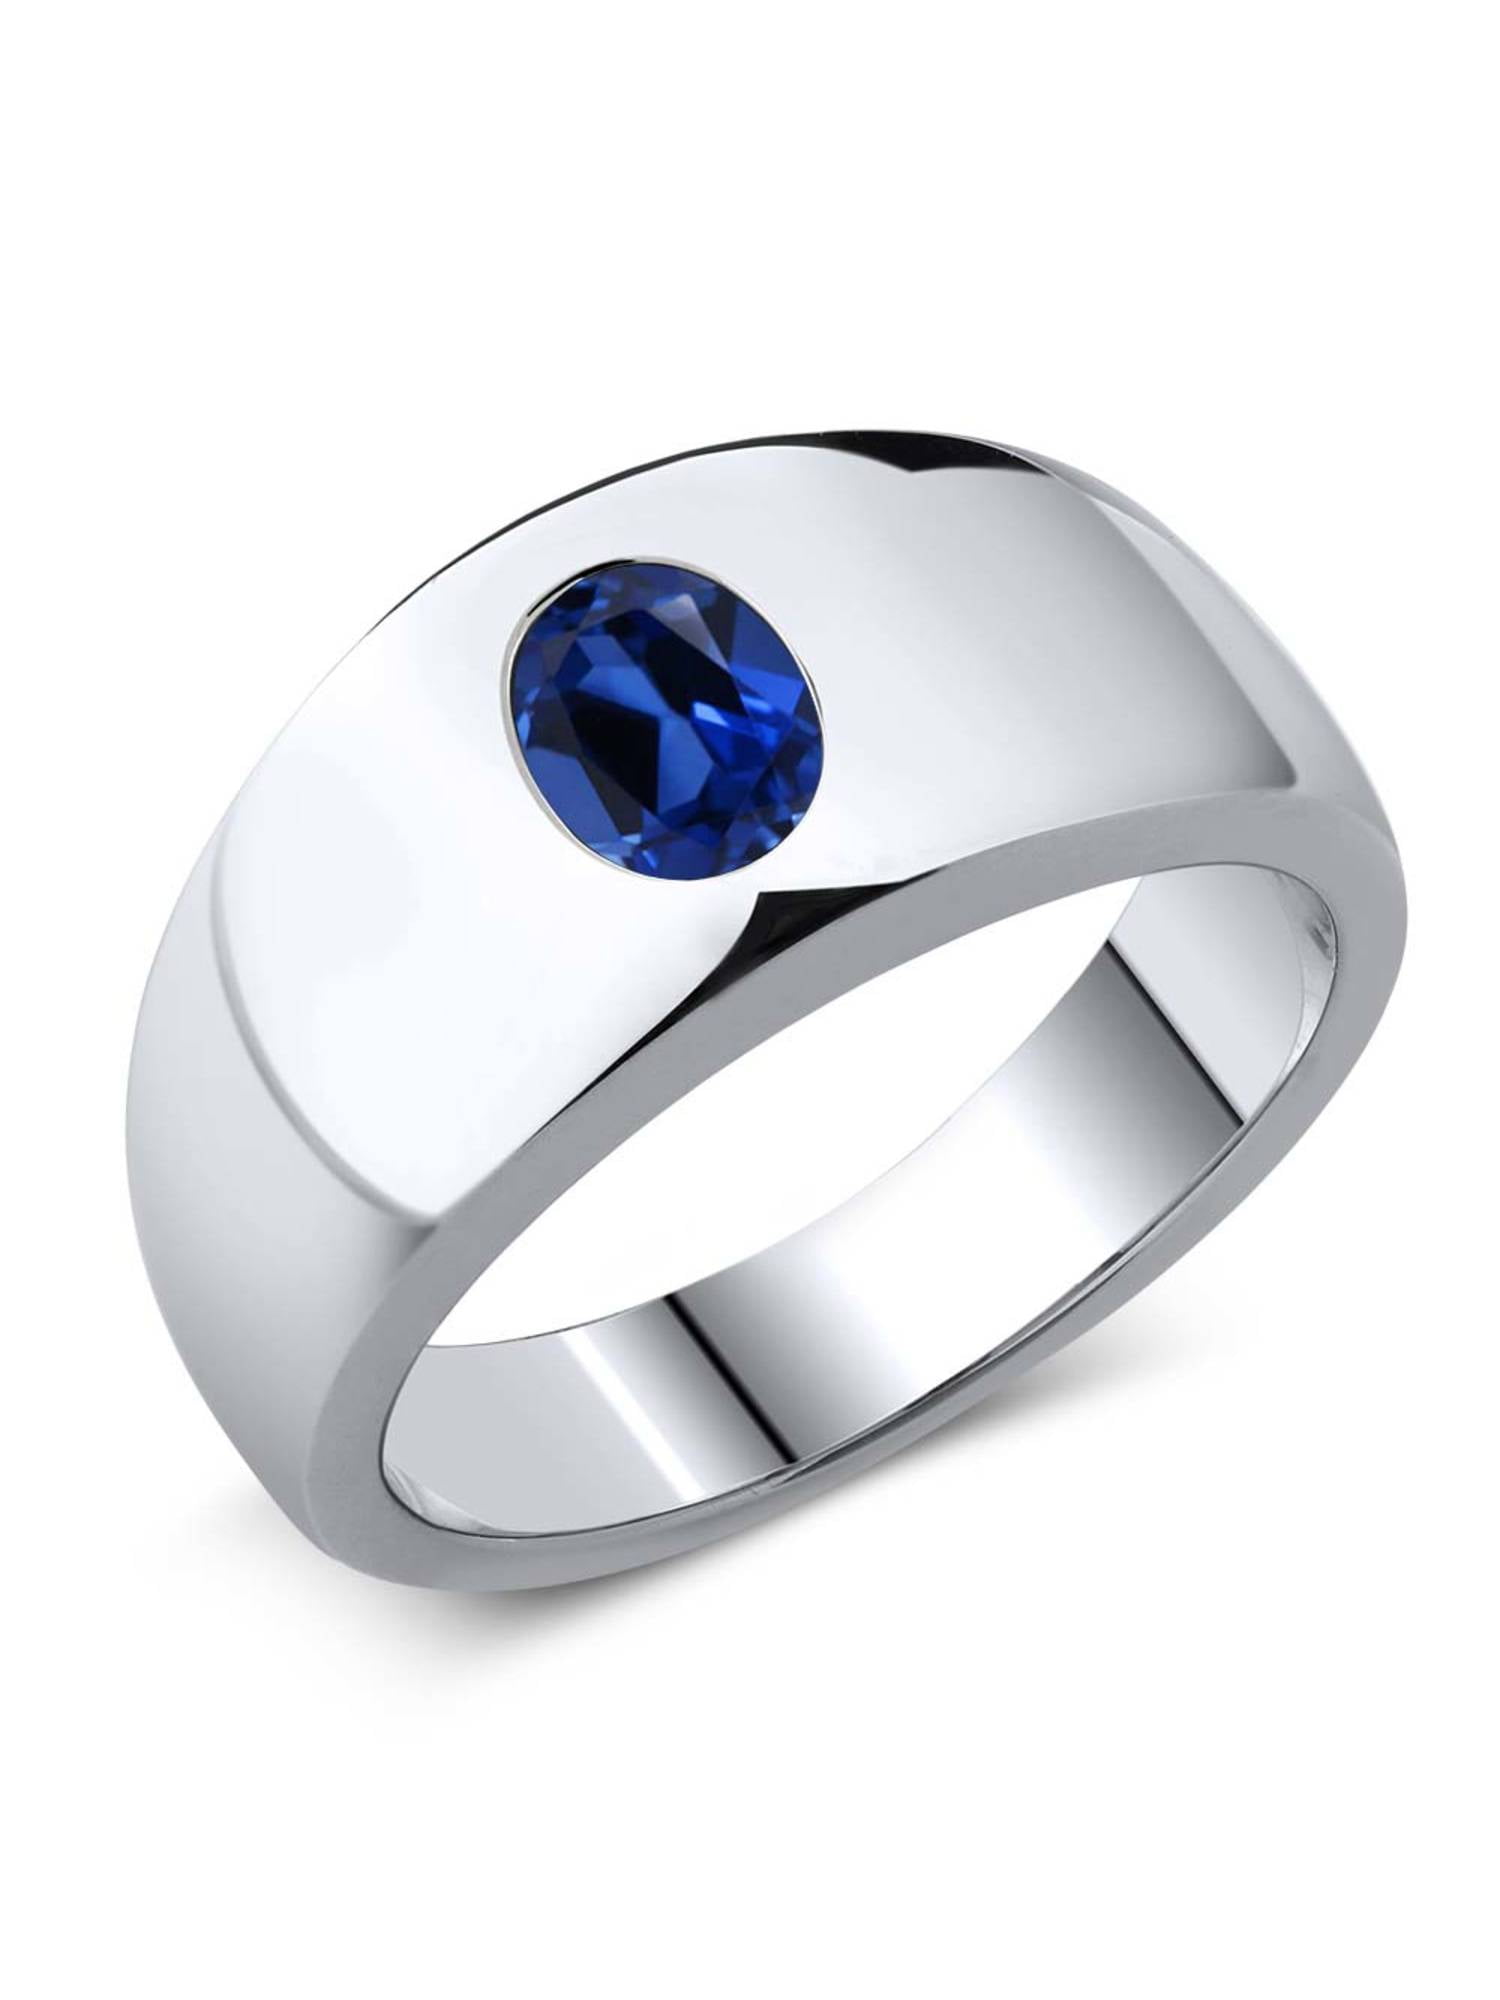 Gem Stone King 925 Sterling Silver Blue Created Sapphire Women's Ring 6.13 Cttw Oval 12X10MM, Available 5,6,7,8,9 